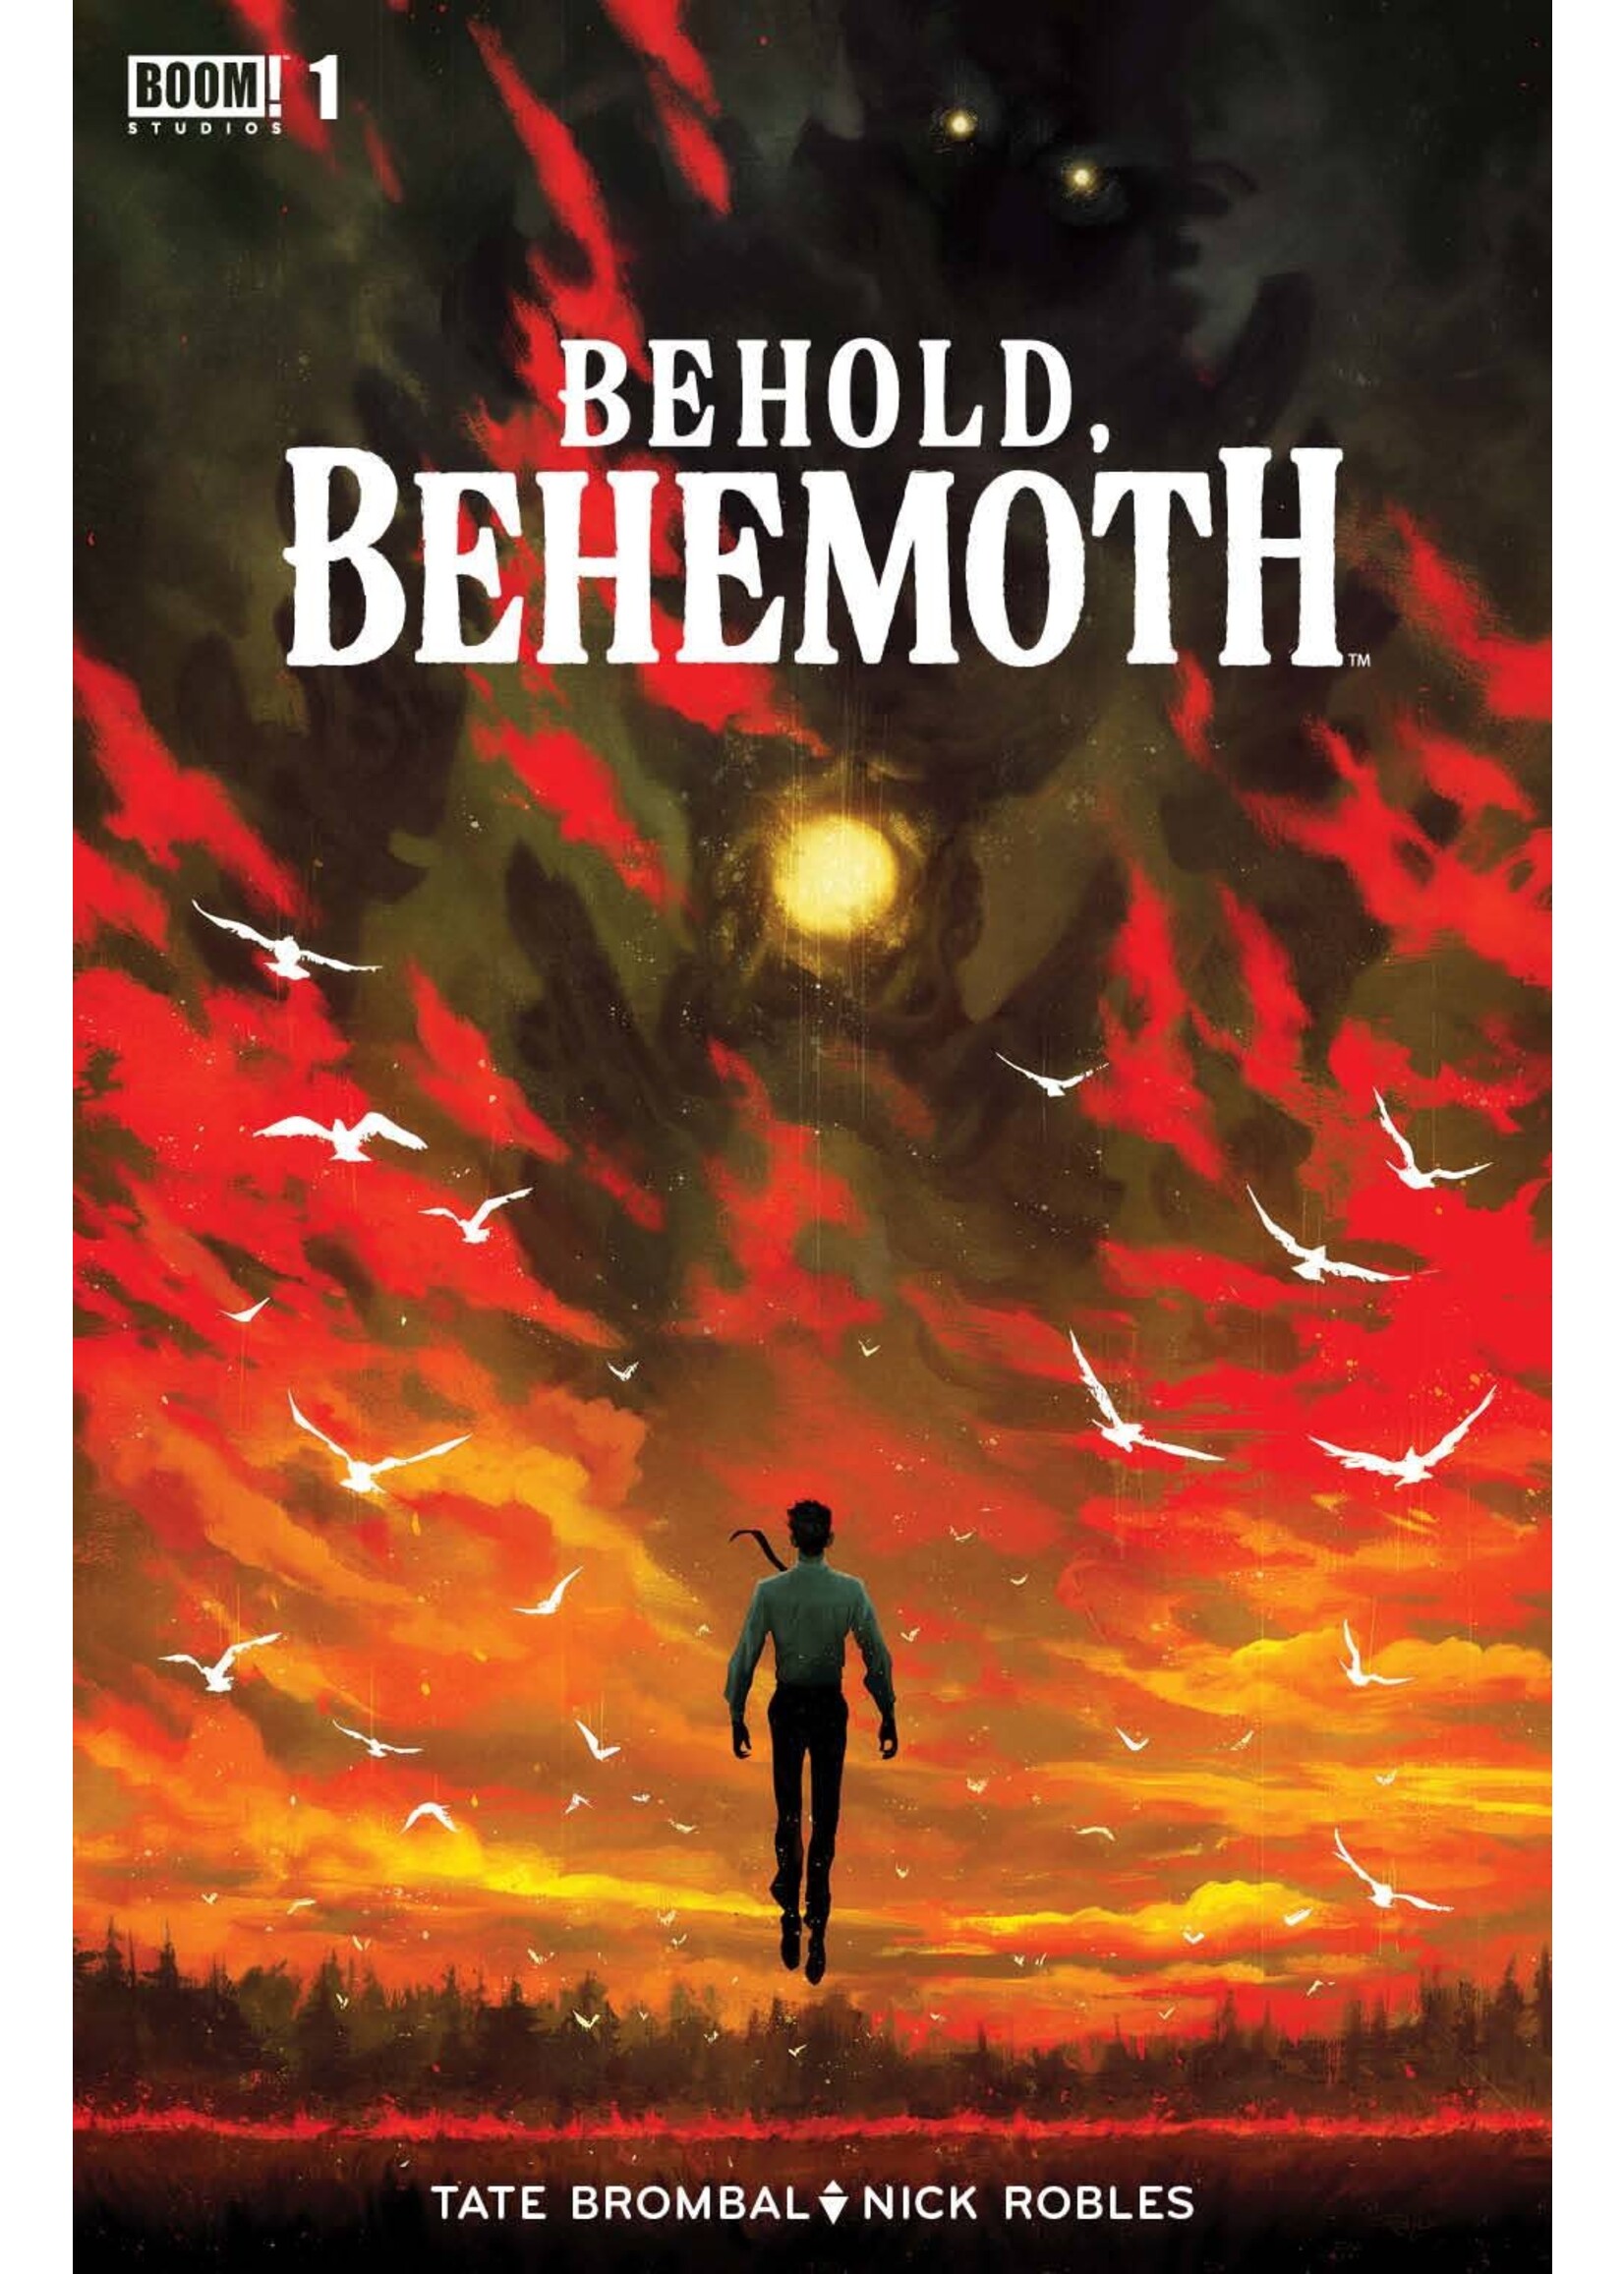 IMAGE COMICS BEHOLD BEHEMOTH complete 5 issue series